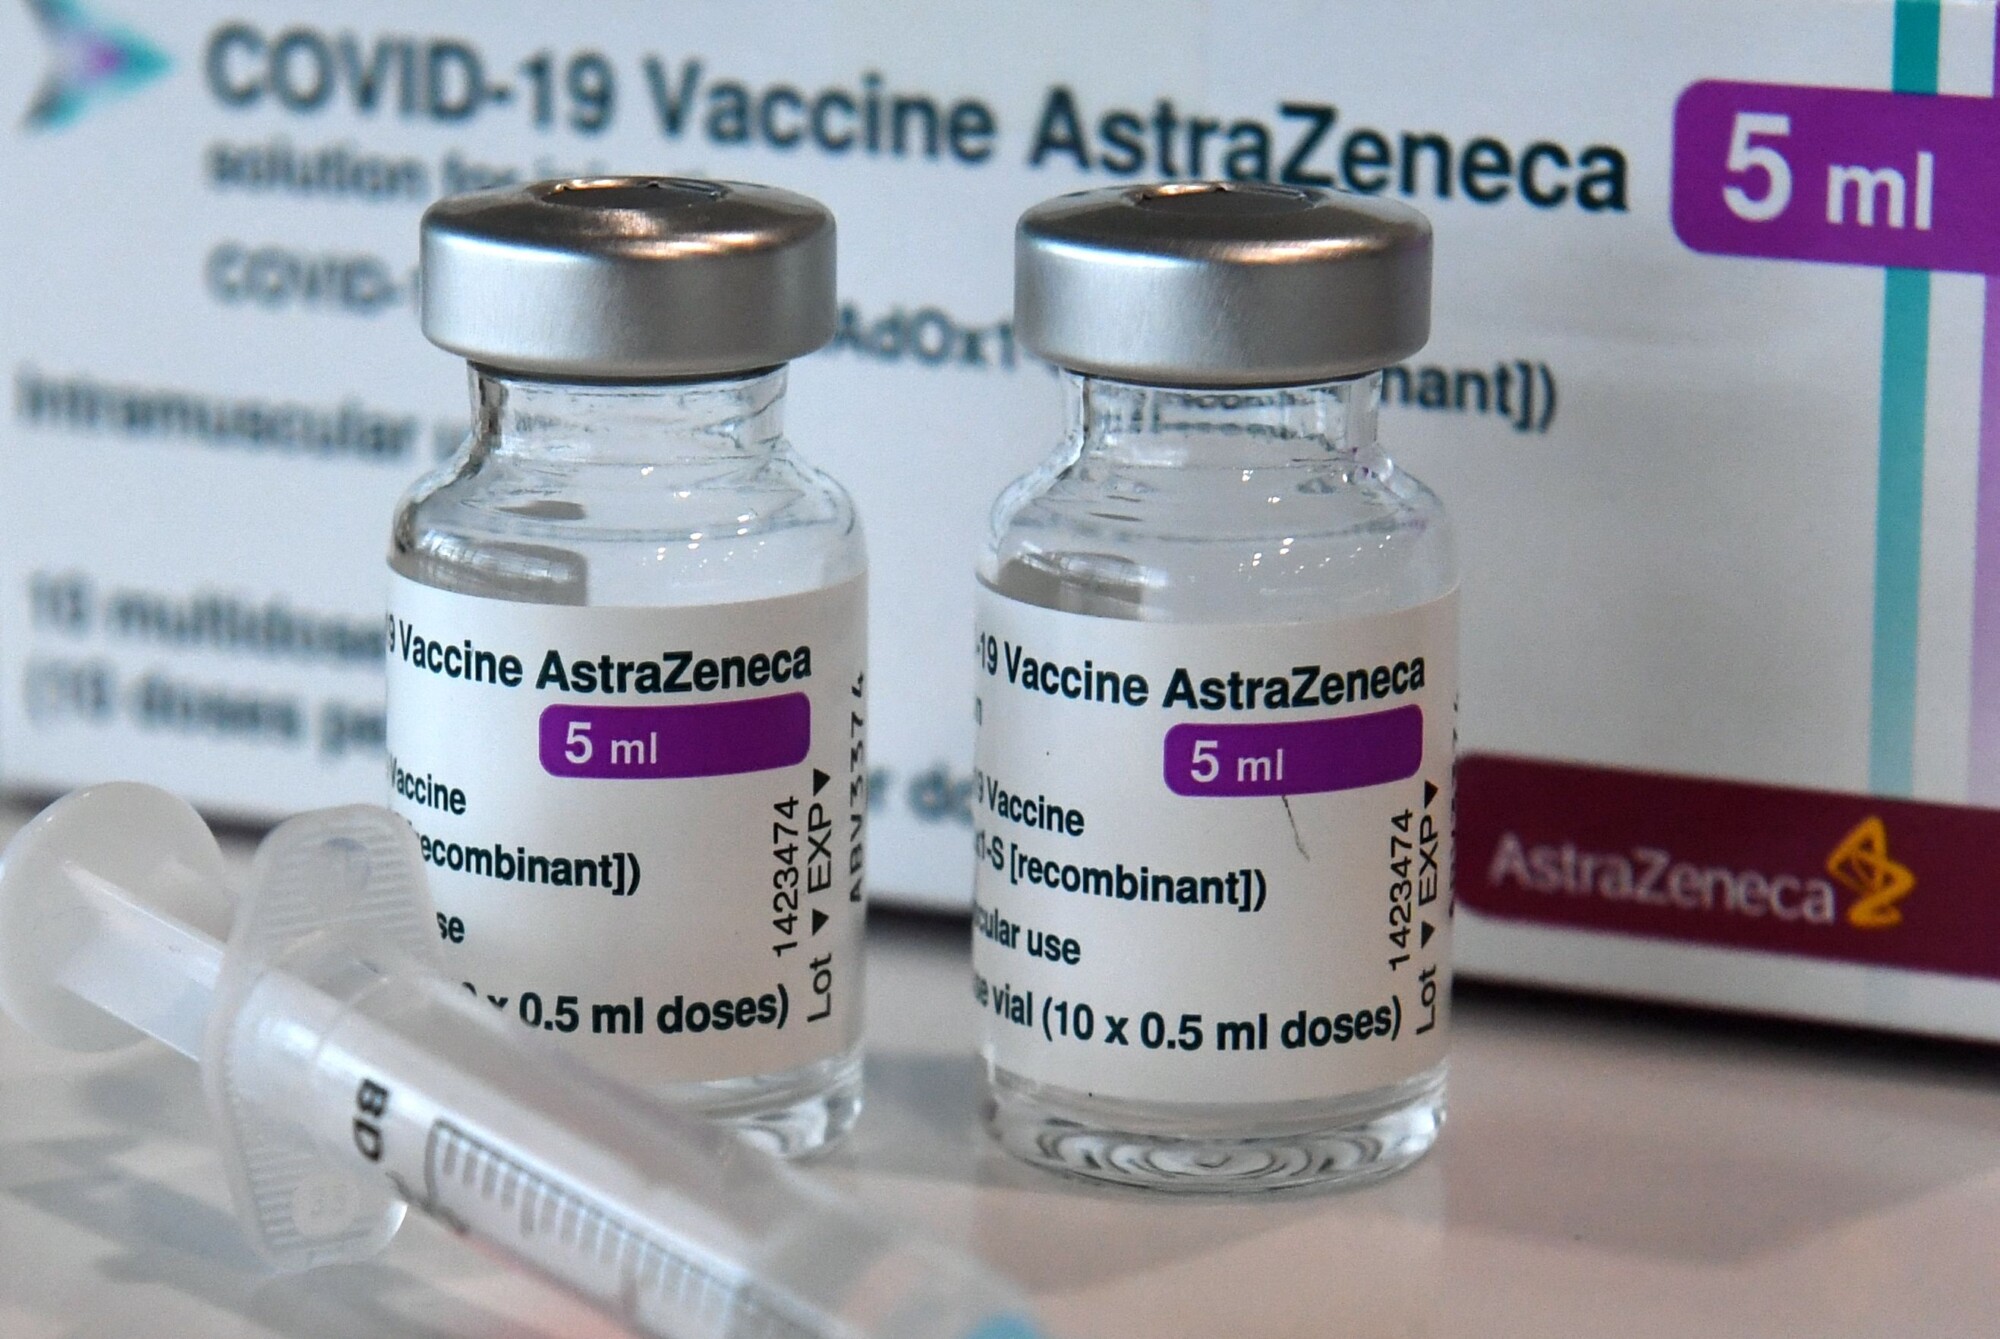 Female Military Member Dies After COVID-19 Vaccine, Showed No Side Effects: Officials